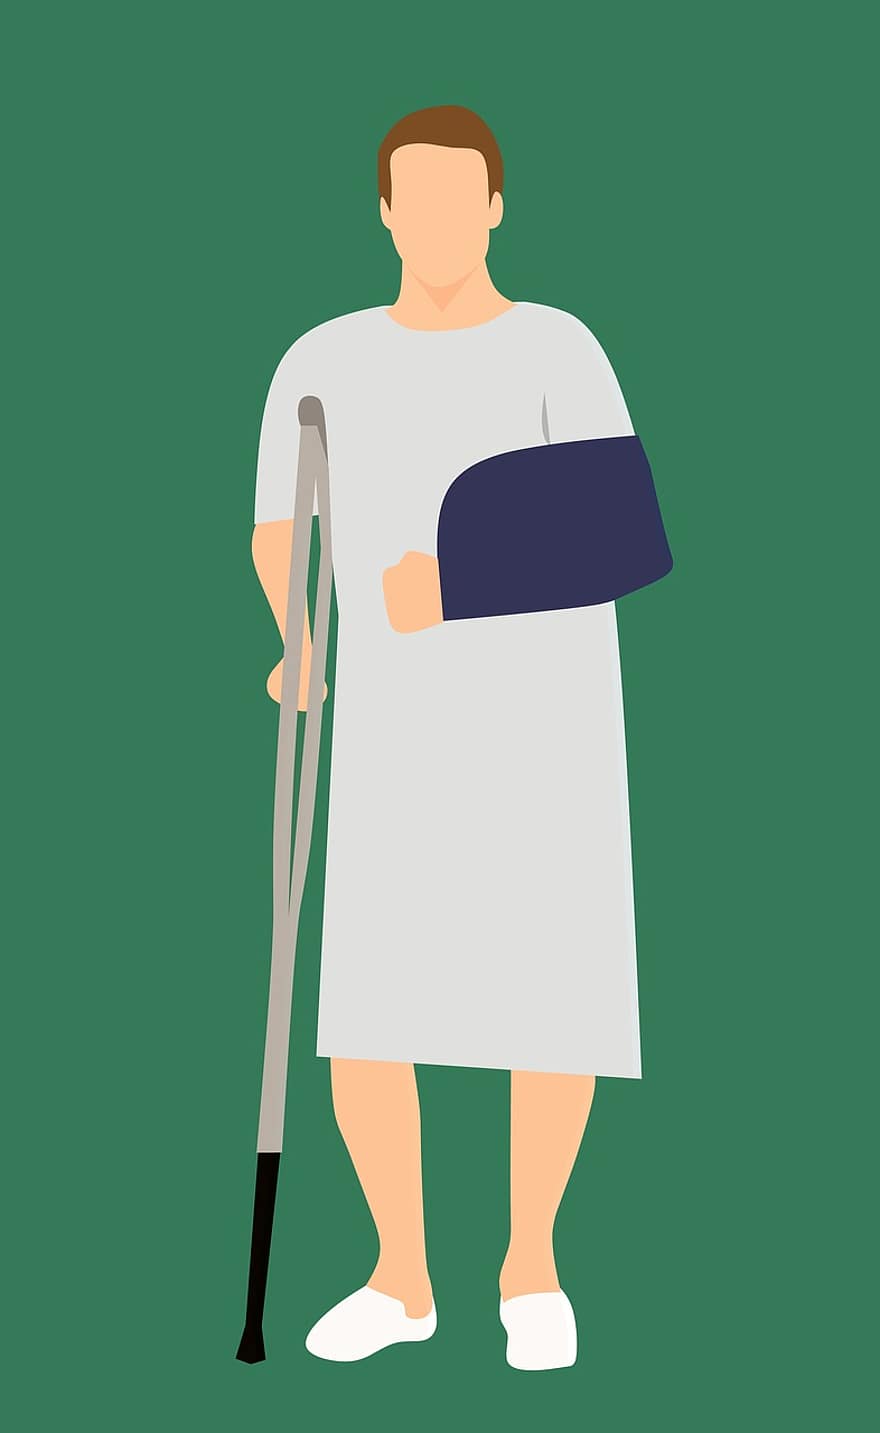 Man, Patient, Standing, Broke, Caucasian, Crutch, Disability, Disabled, Equipment, Fullbody, Guy